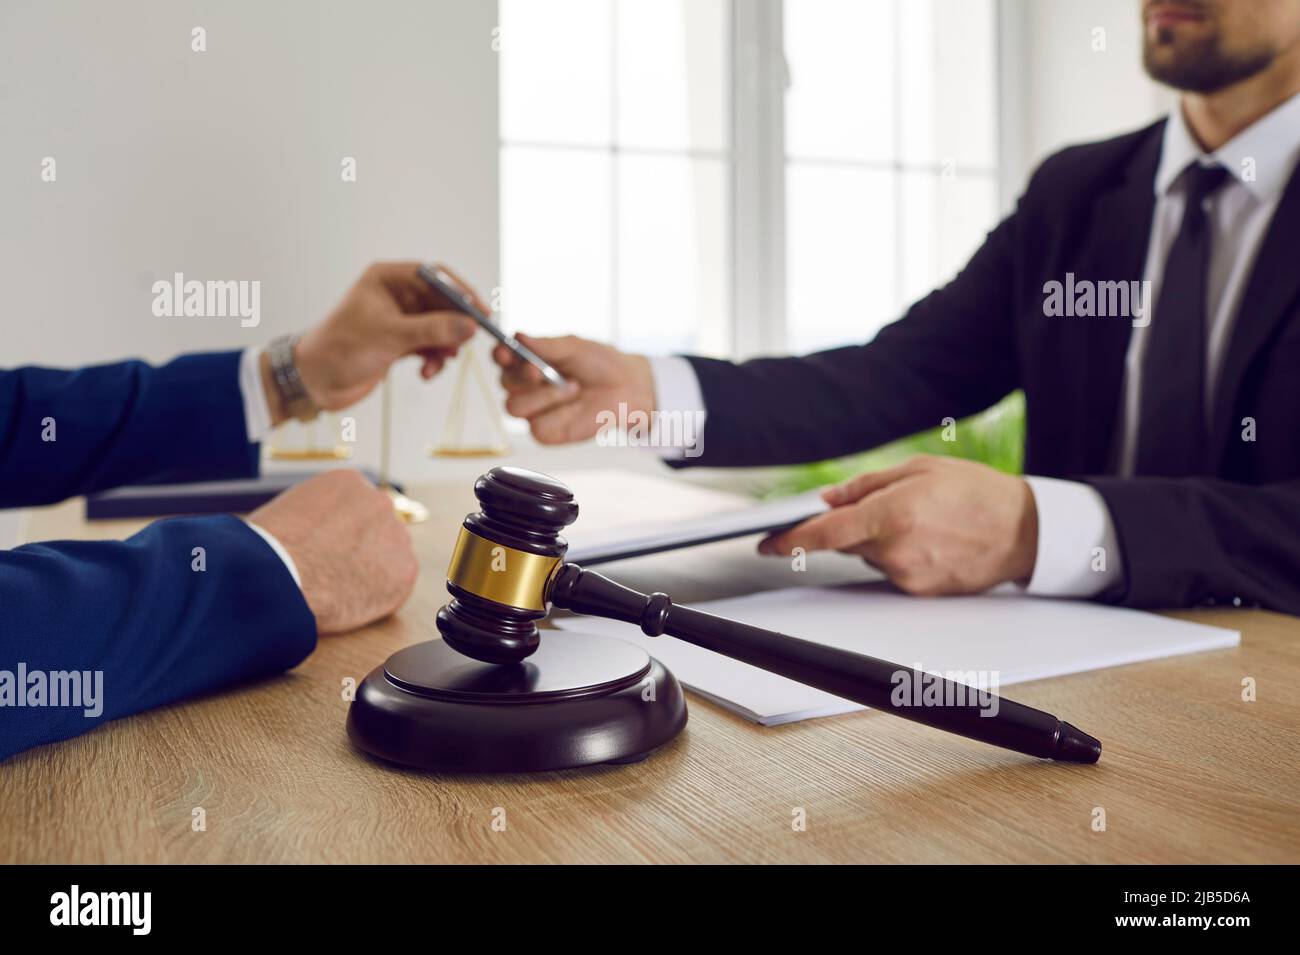 Wooden brown gavel of judge against background of lawyer and client signing legal contract. Stock Photo